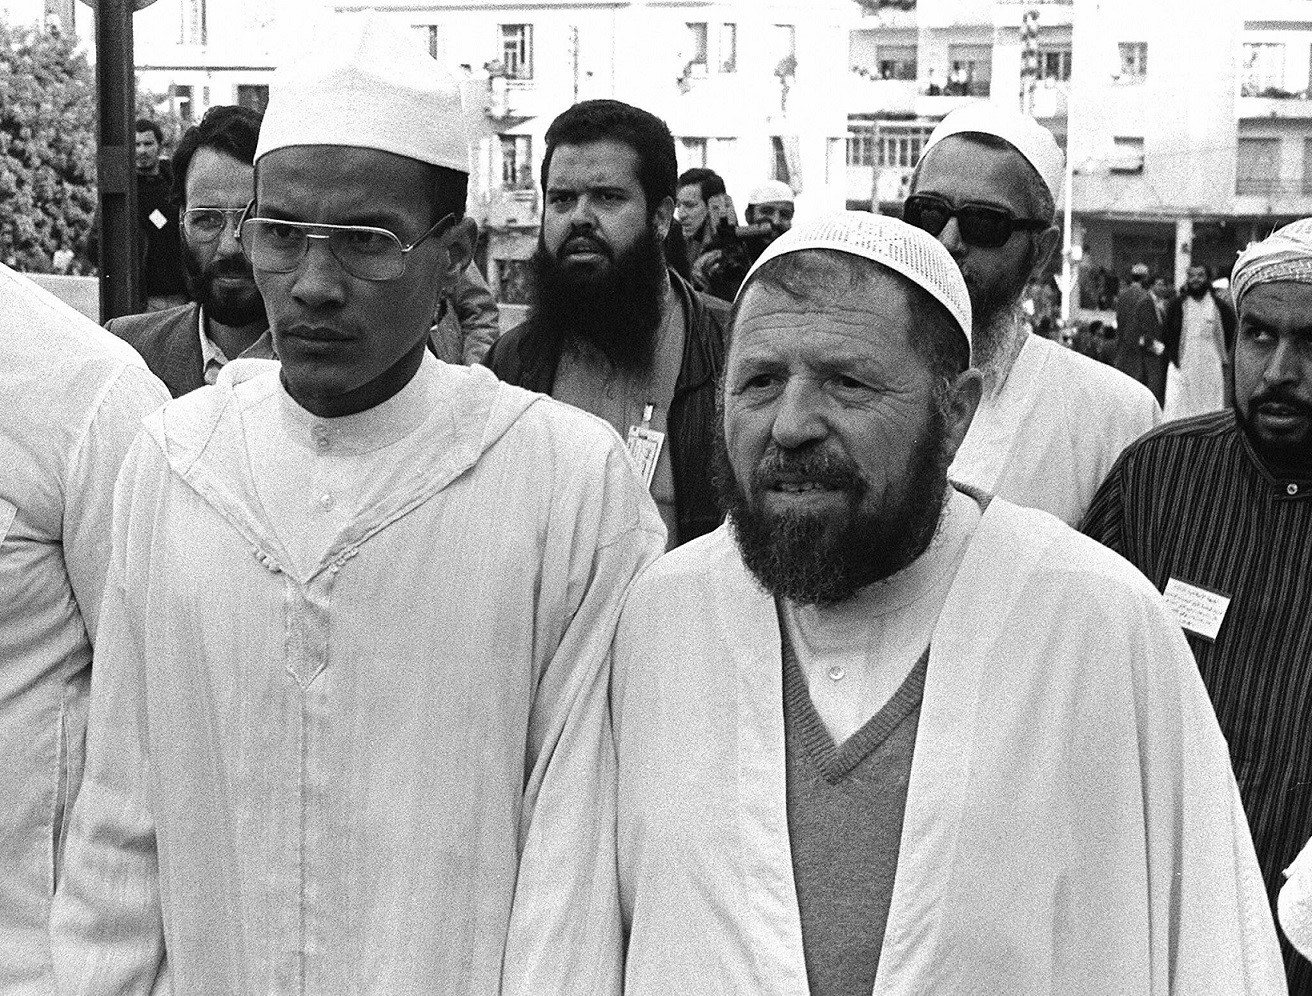 The historic leader of the Islamic Salvation Front (FIS), Abbasi Madani (R), stands next to Ali Belhadj, the movement's number two, in Algiers in May 1991 (AFP)